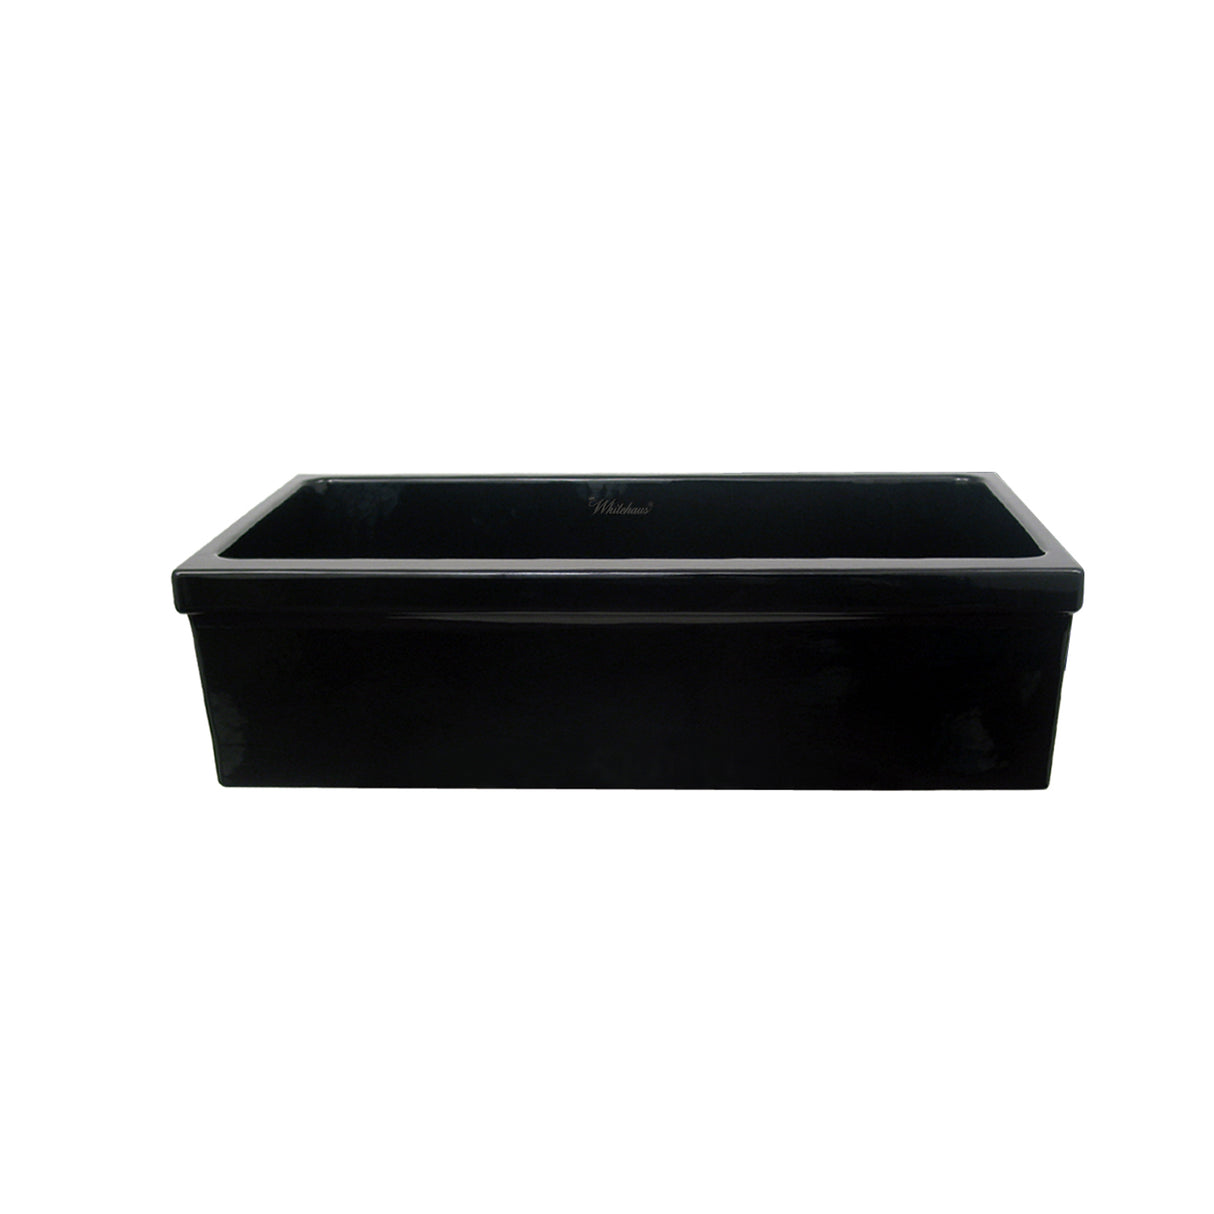 Farmhaus Fireclay Quatro Alcove Large Reversible Sink with Decorative 2 ½" Lip on One Side and 2" Lip on the Opposite Side